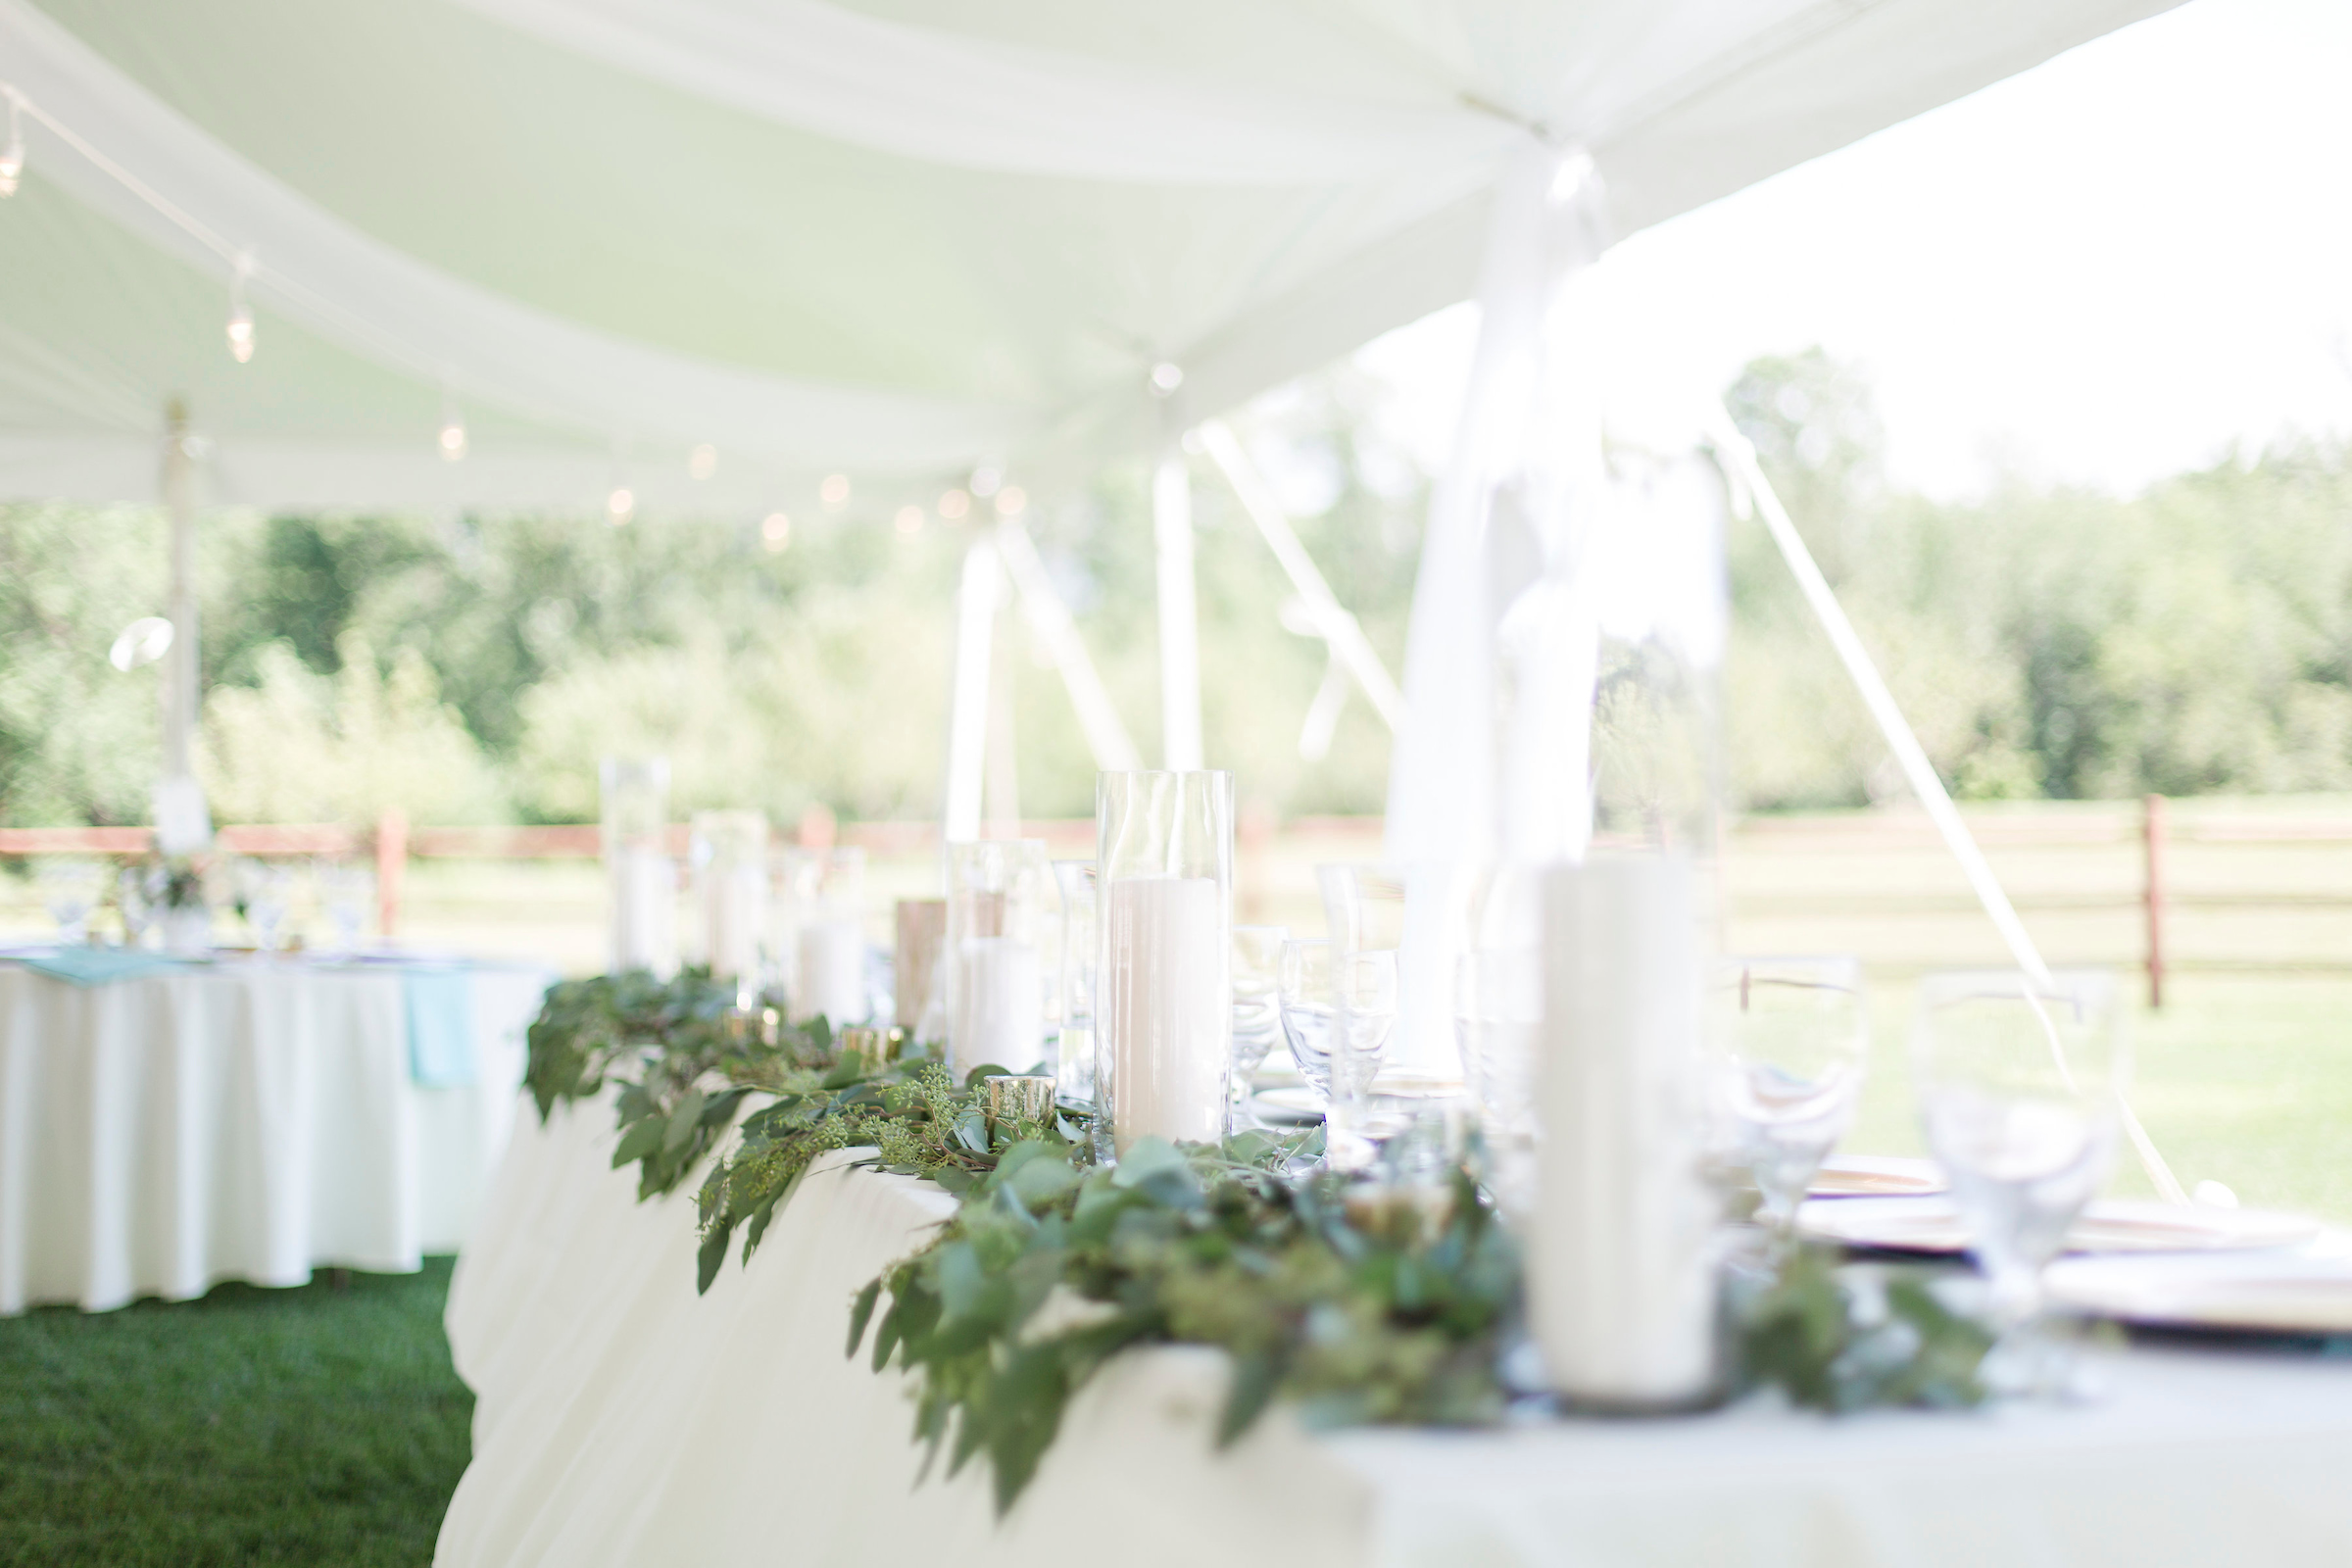 A wedding table decorated with white table cloths and greenery surrounding white tall clear glass candle holders.